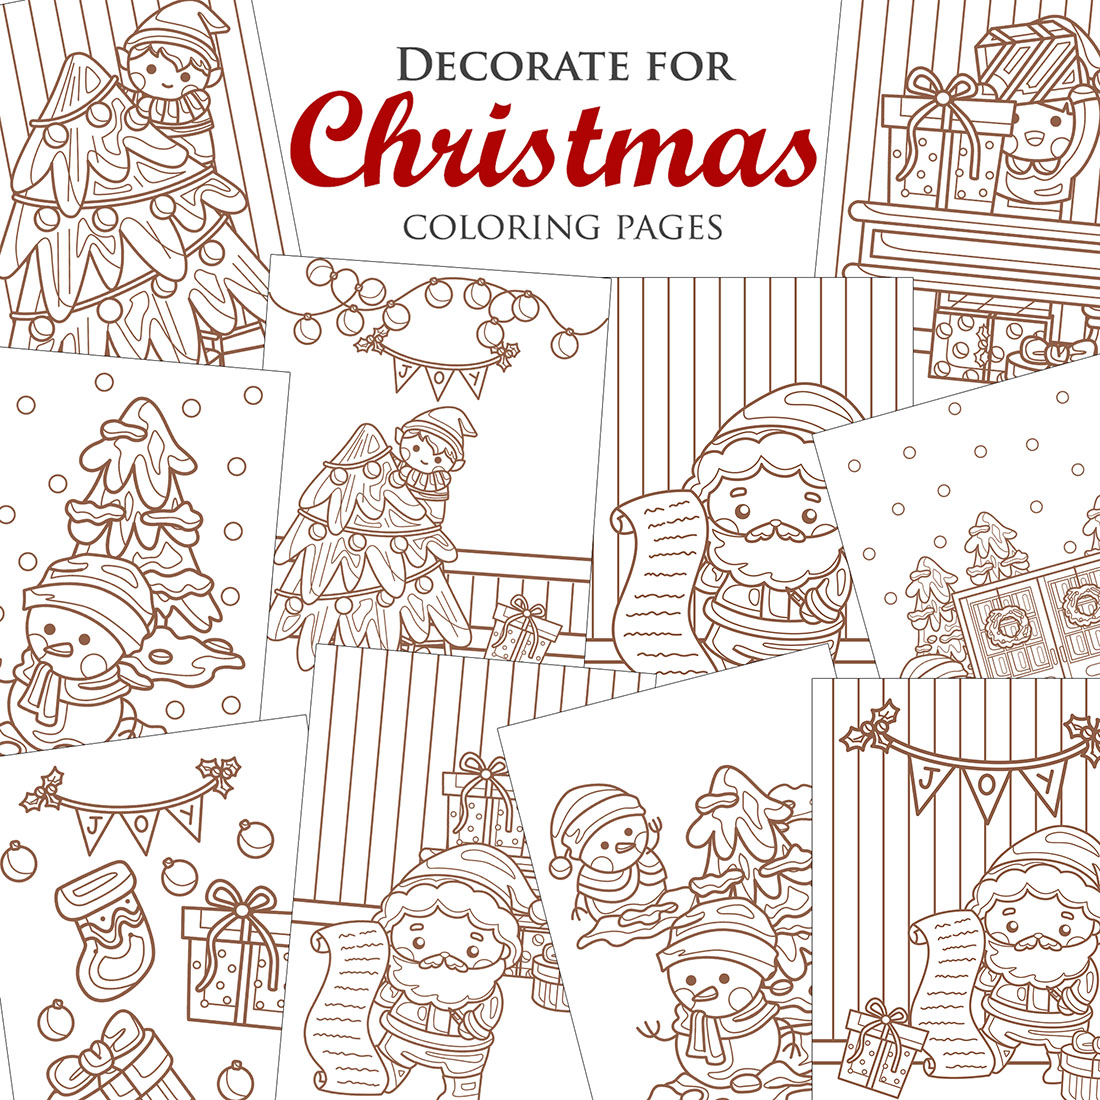 Decorated for Christmas Character Snowman Santa Claus Elf Holiday Decoration Background Cartoon Coloring Pages for Kids and Adult cover image.